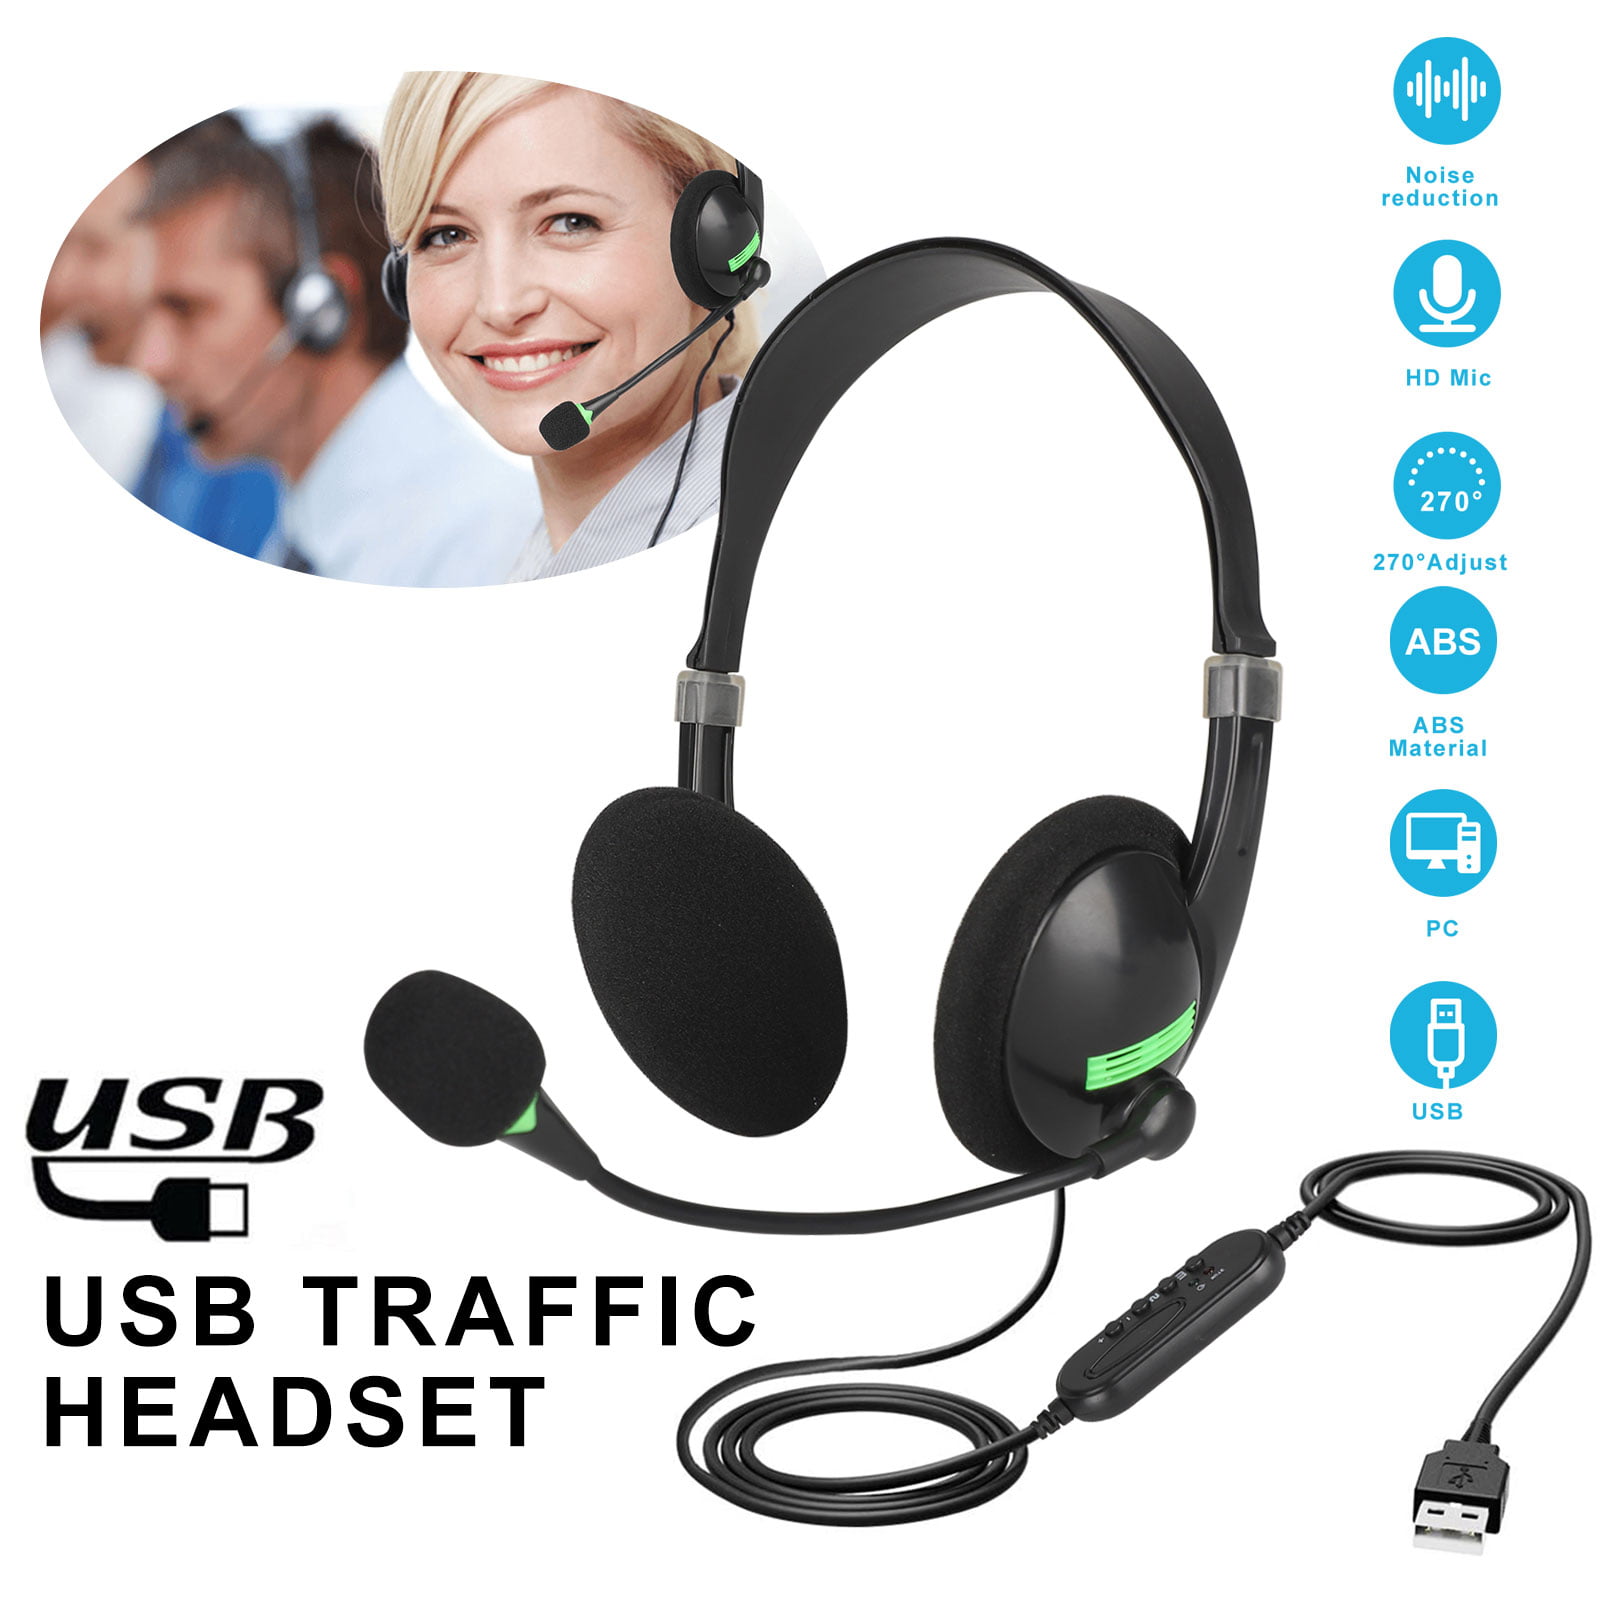 USB Headsets Stereo with Noise Cancelling Mic and in-line Controls, PC Business Headset fits for Skype, SoftPhone, Call Center - Crystal Clear Chat, Super Lightweight, Ultra Comfort (Black)